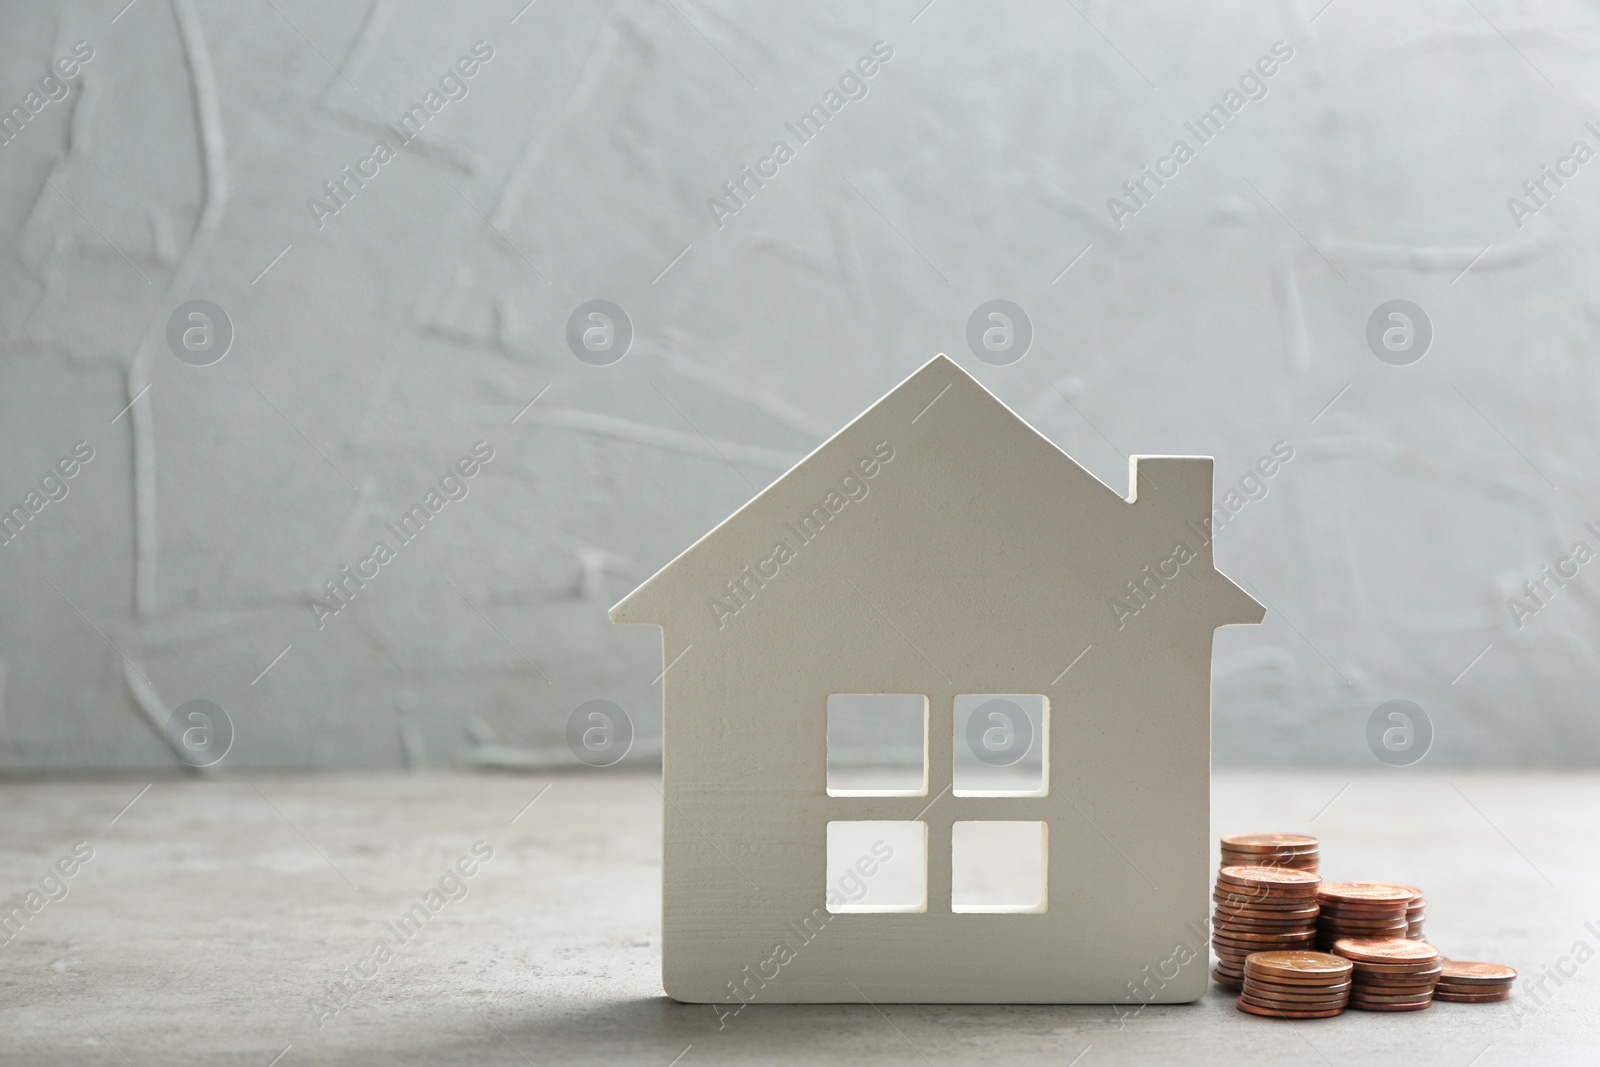 Photo of House figure and coins on table against grey background. Space for text